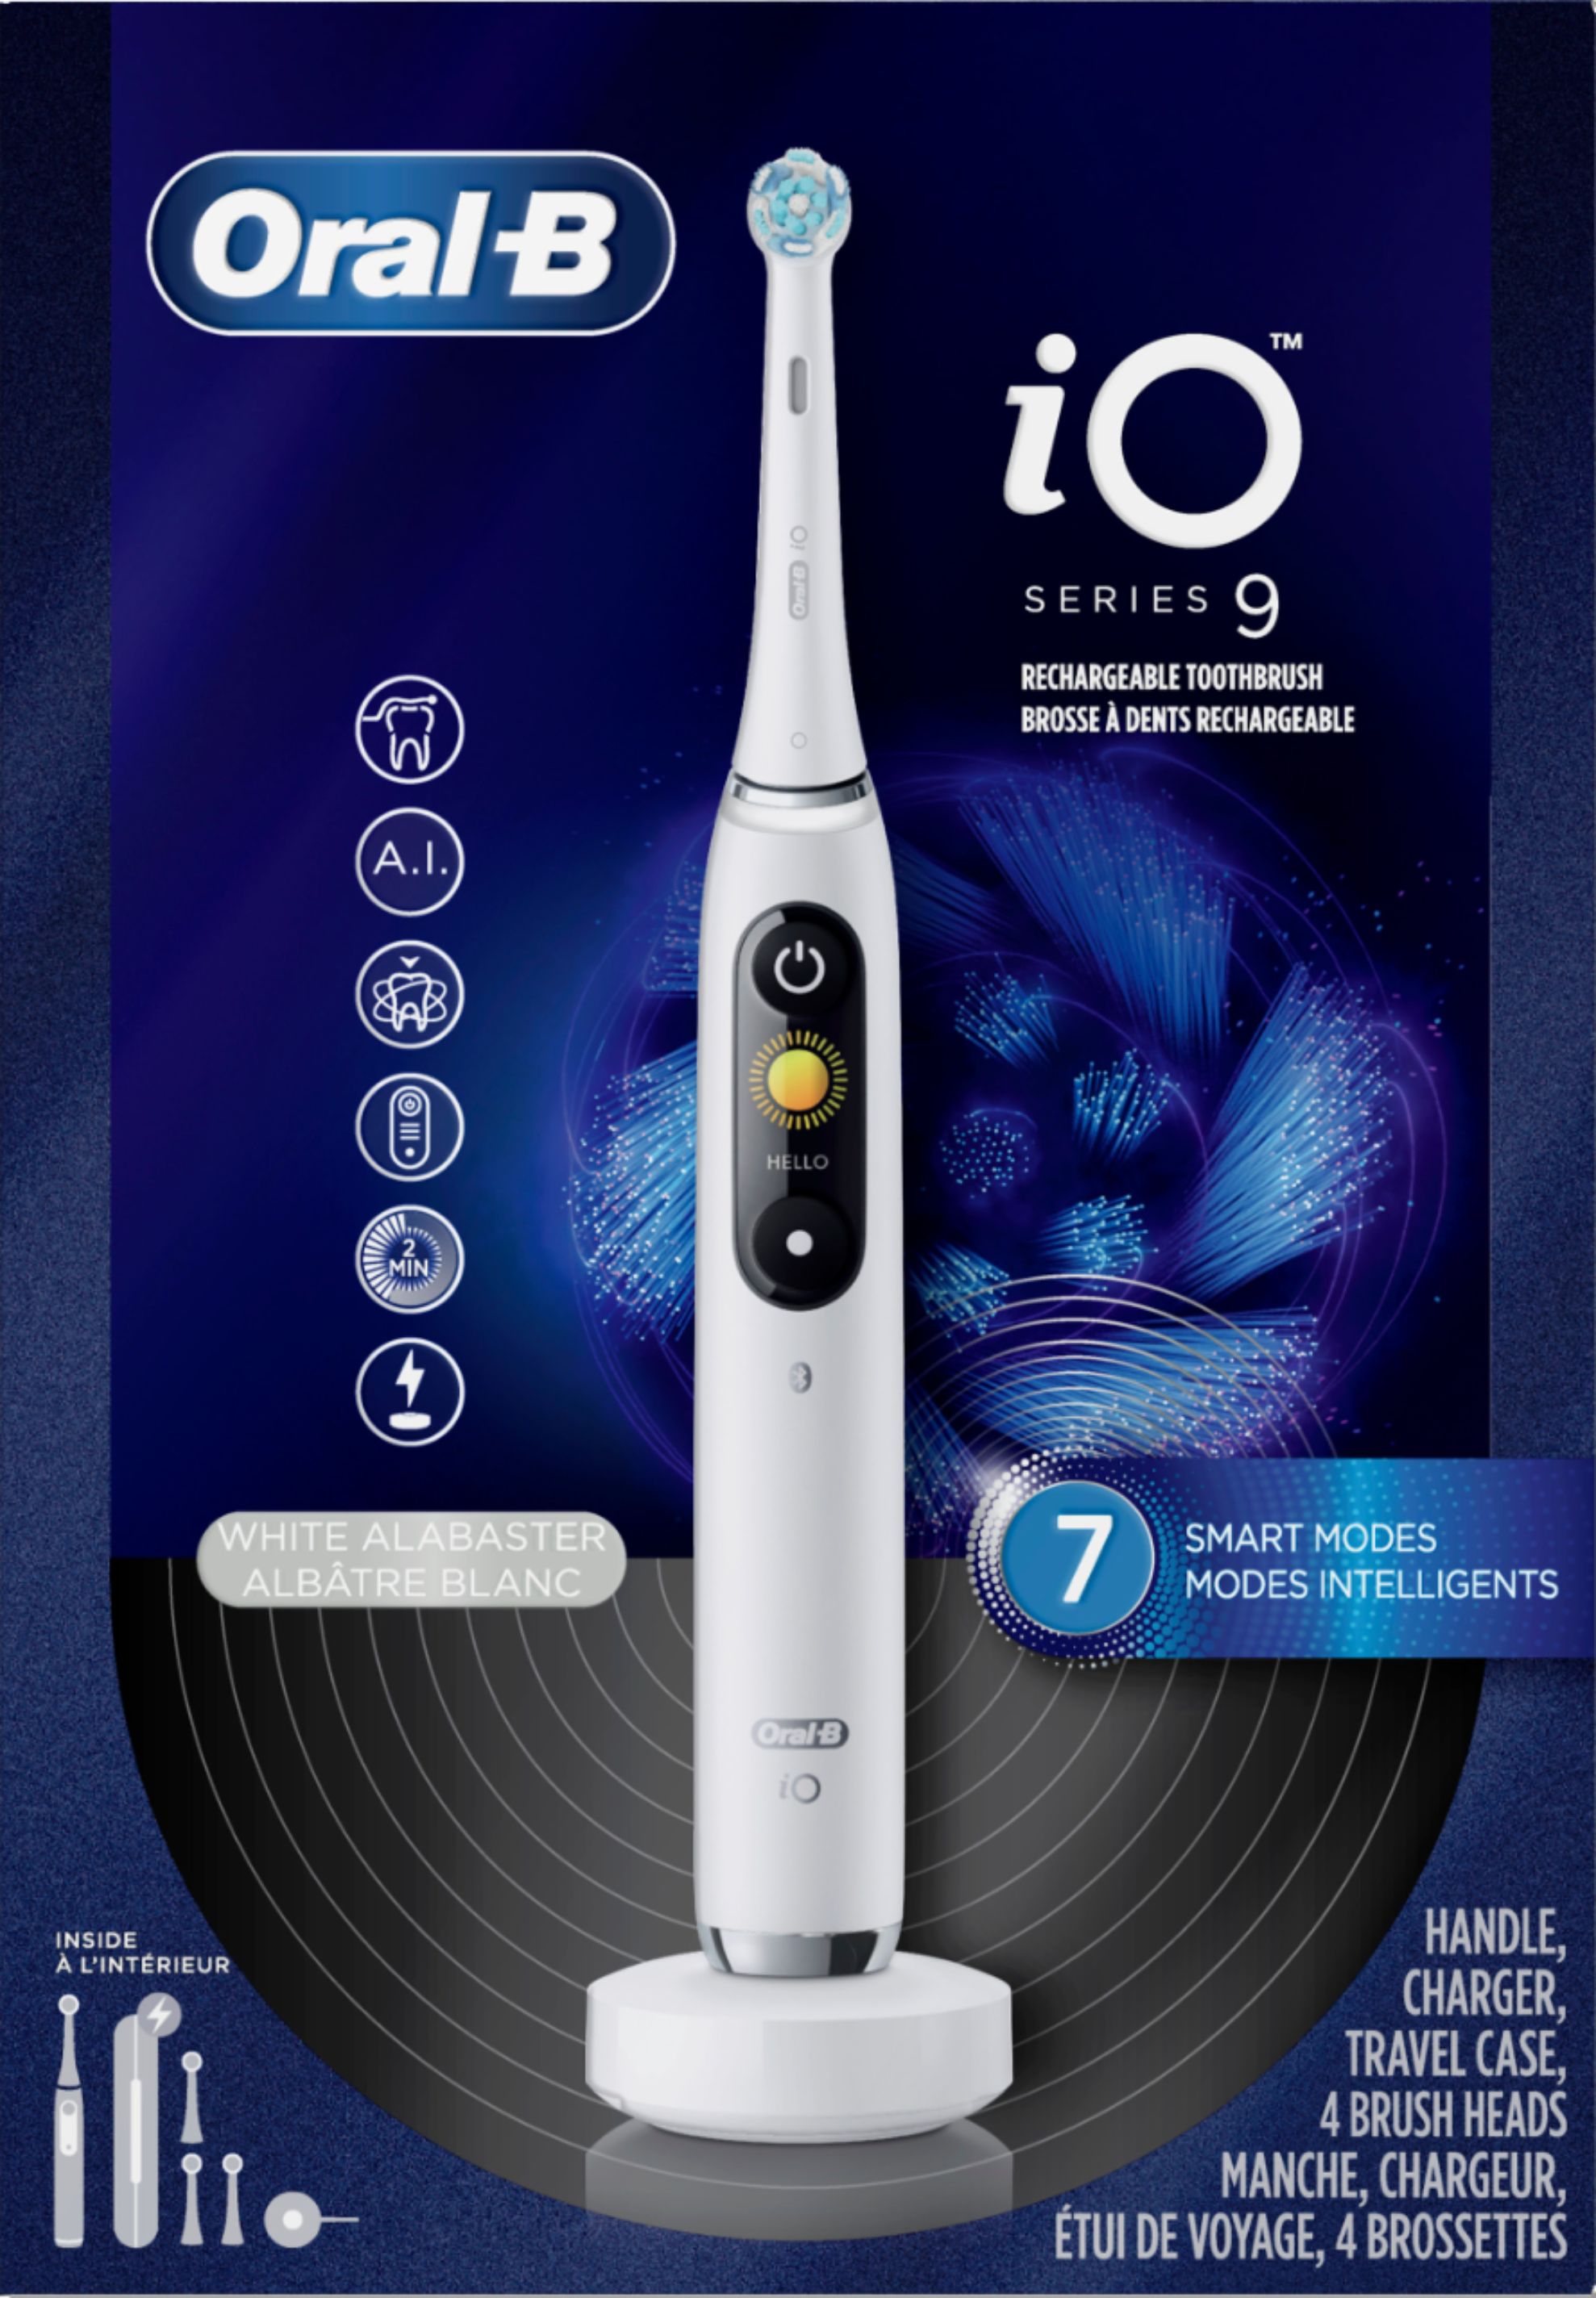 Oral-B iO Series 5 Electric Toothbrush with (1) Brush Head, Rechargeable,  White